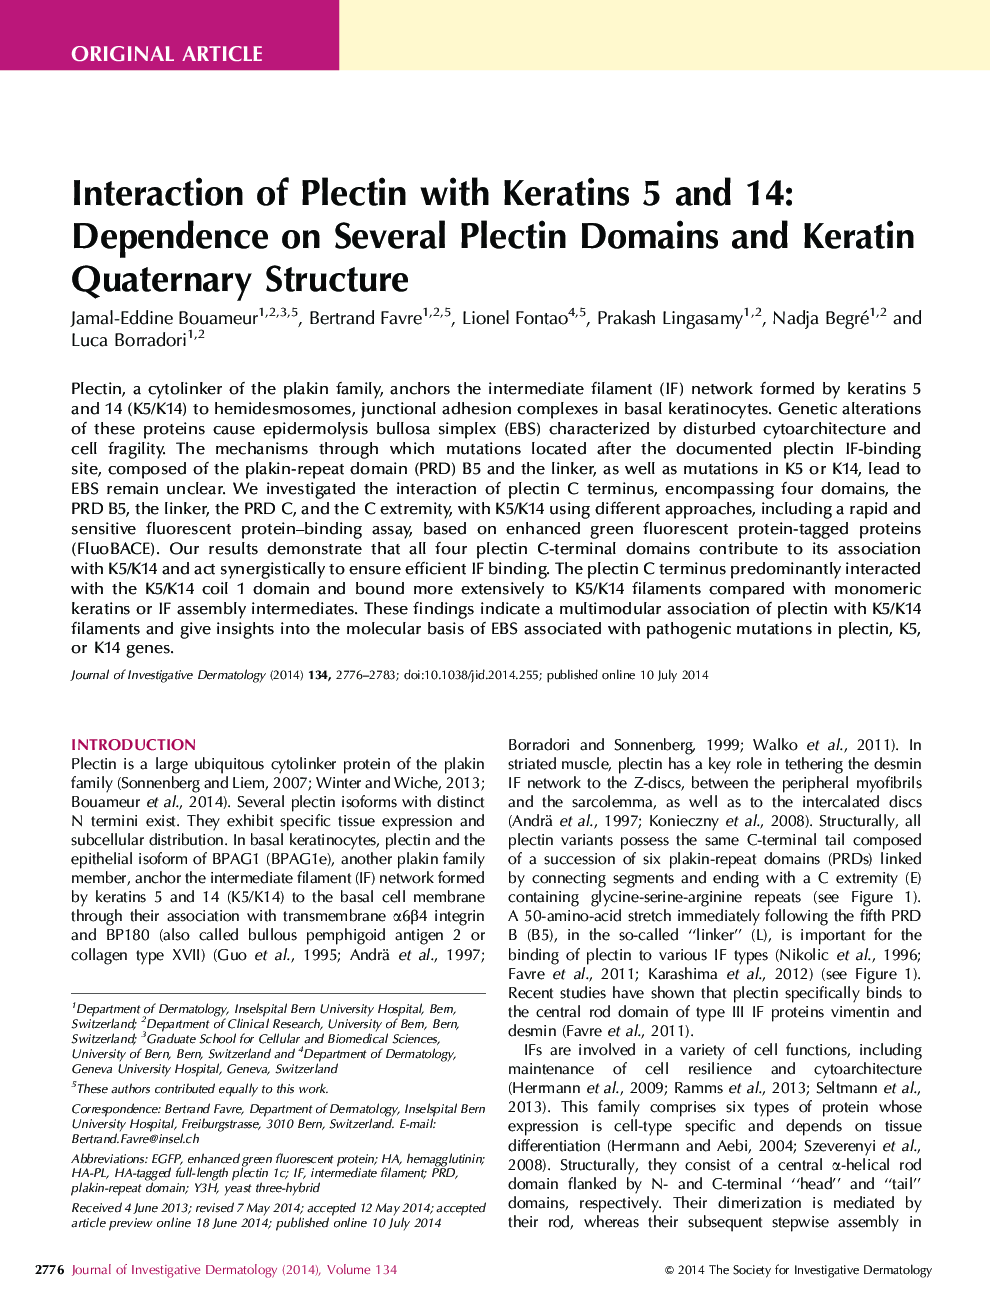 Interaction of Plectin with Keratins 5 and 14: Dependence on Several Plectin Domains and Keratin Quaternary Structure 